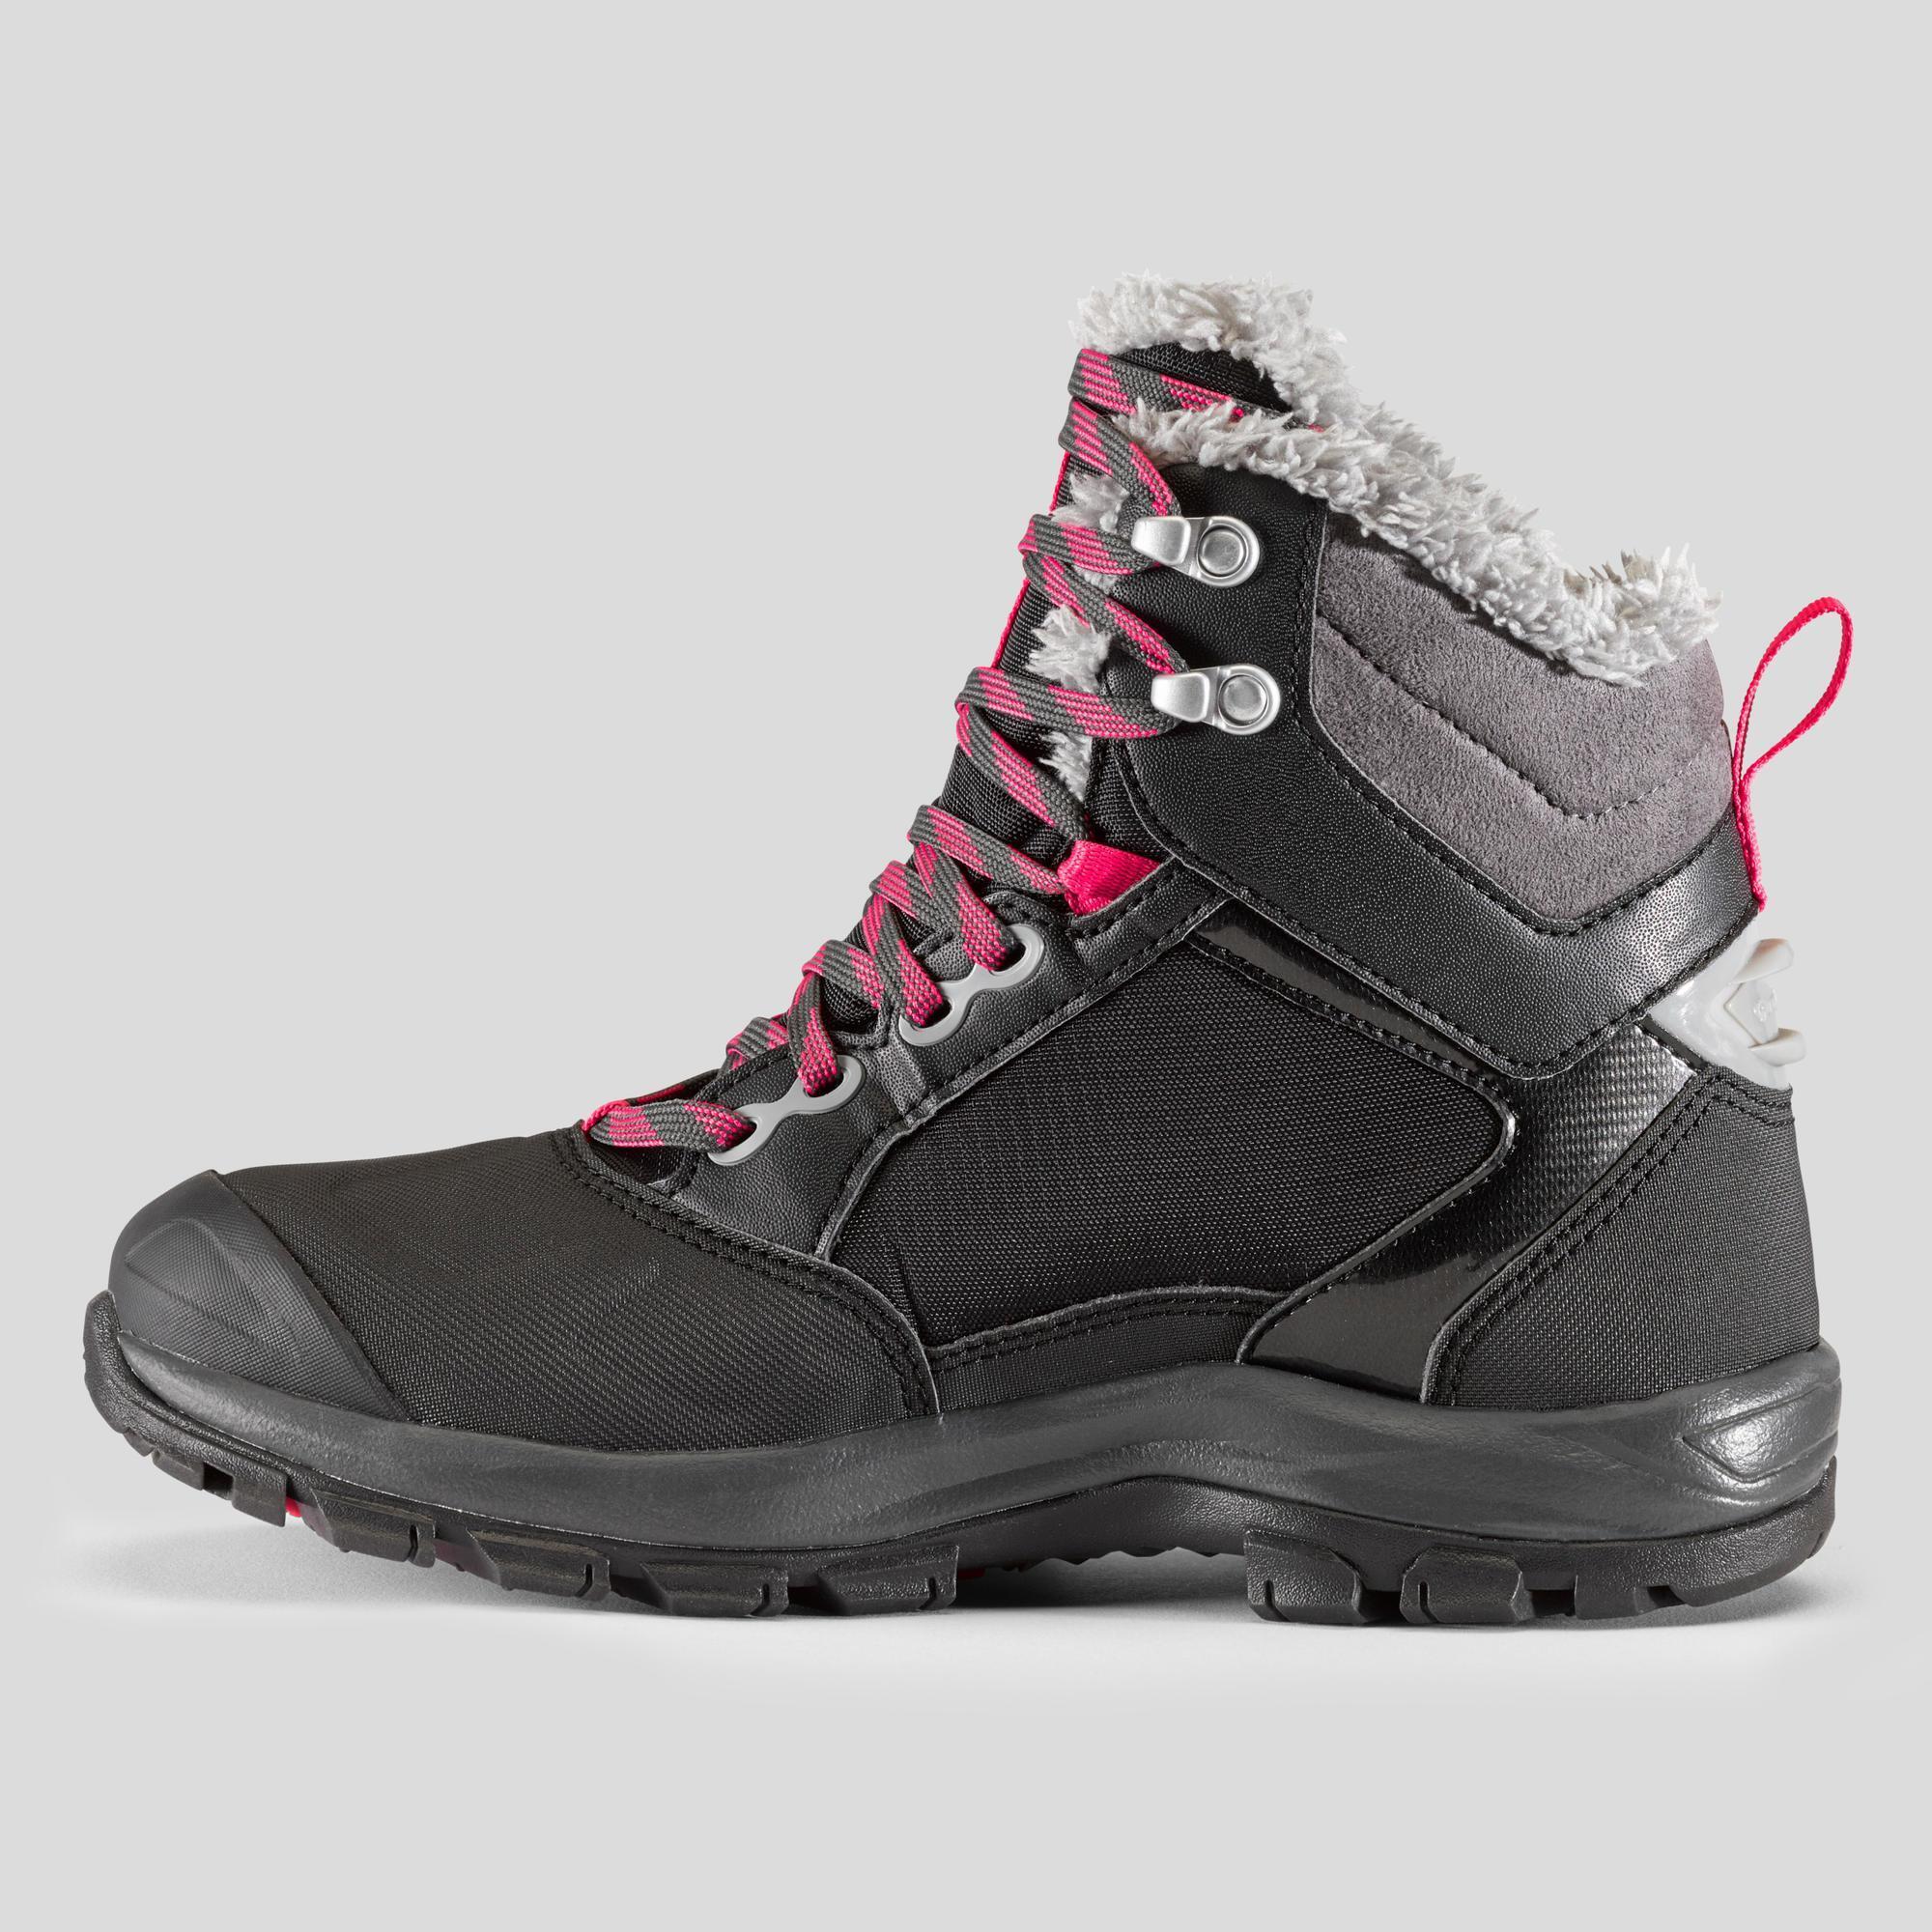 Women's Warm and Waterproof Hiking Boots - SH500 mountain MID 3/7